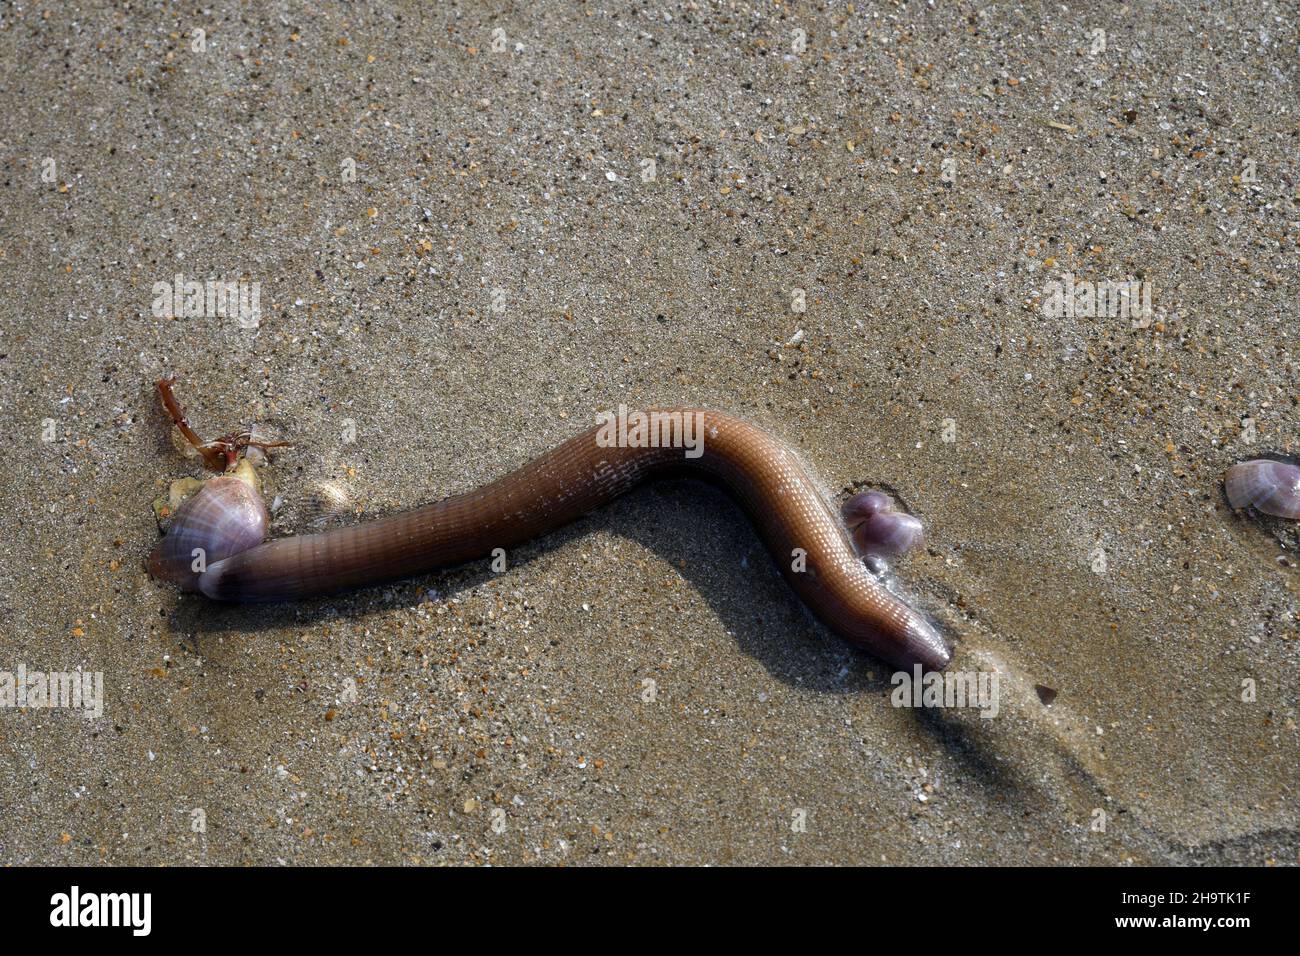 European lug worm, blow lug, lugworm (Arenicola marina), at ebbtide on the beach, view from above, France, Brittany, Département Côtes-d’Armor , Stock Photo